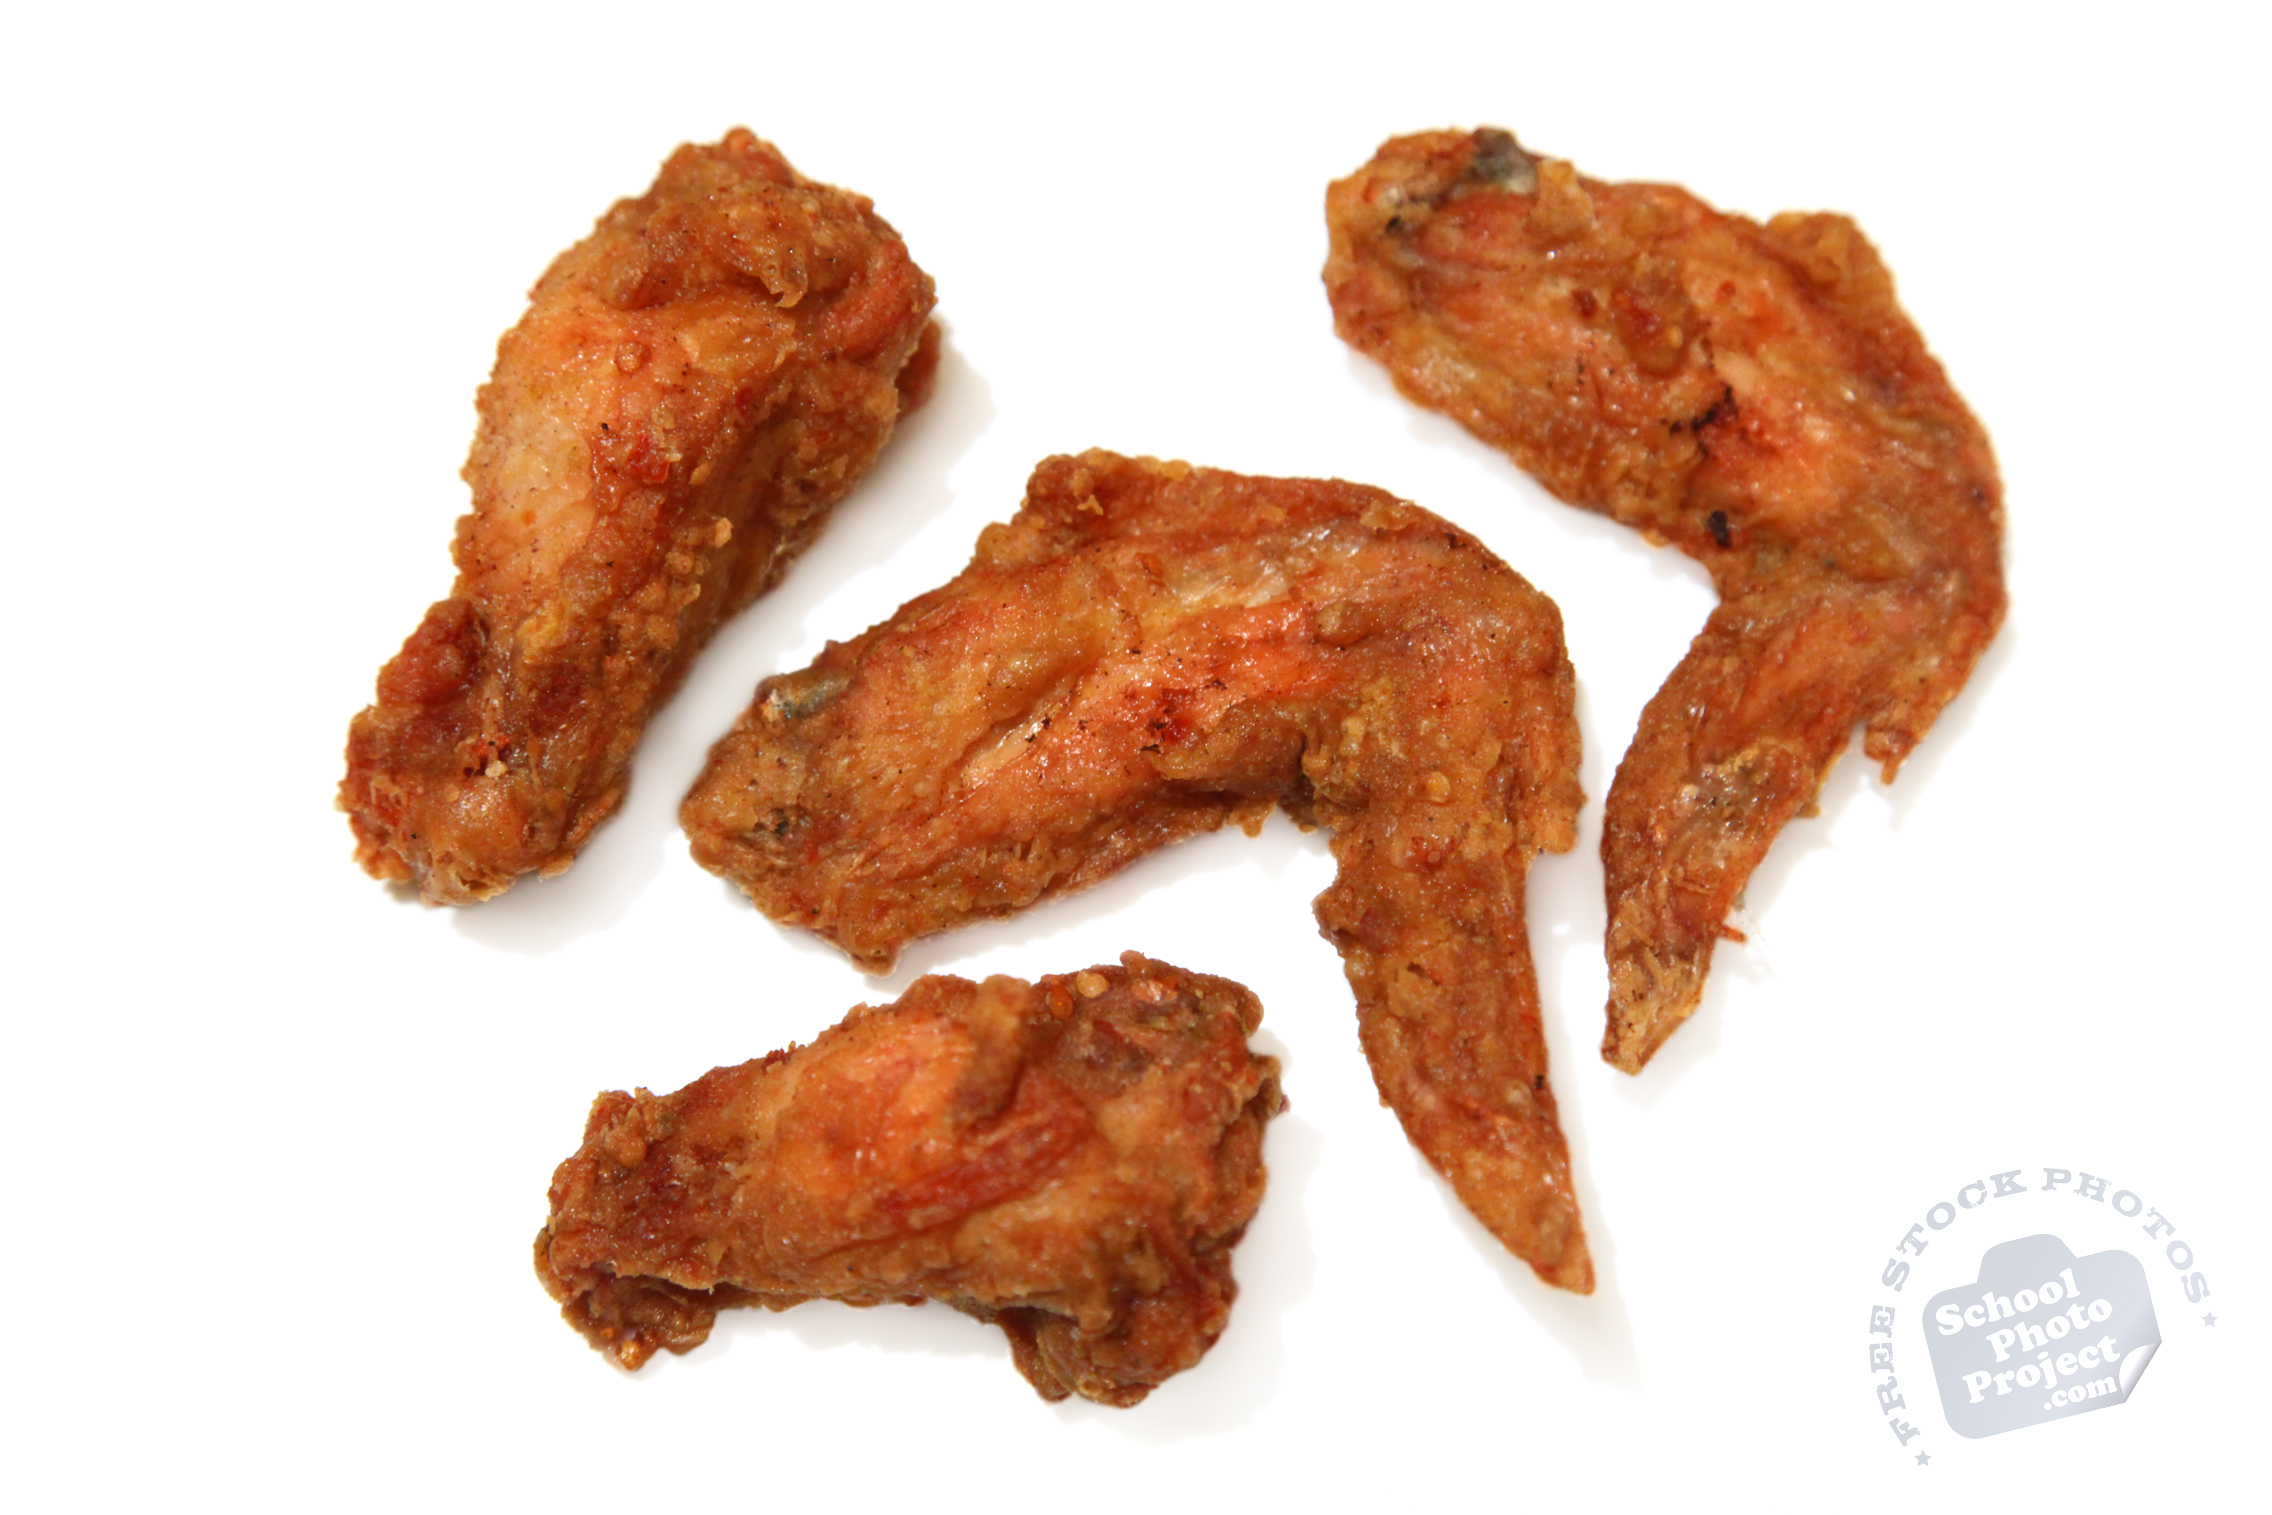 Fried Chicken, FREE Stock Photo, Image, Picture: Chicken Wings and ...